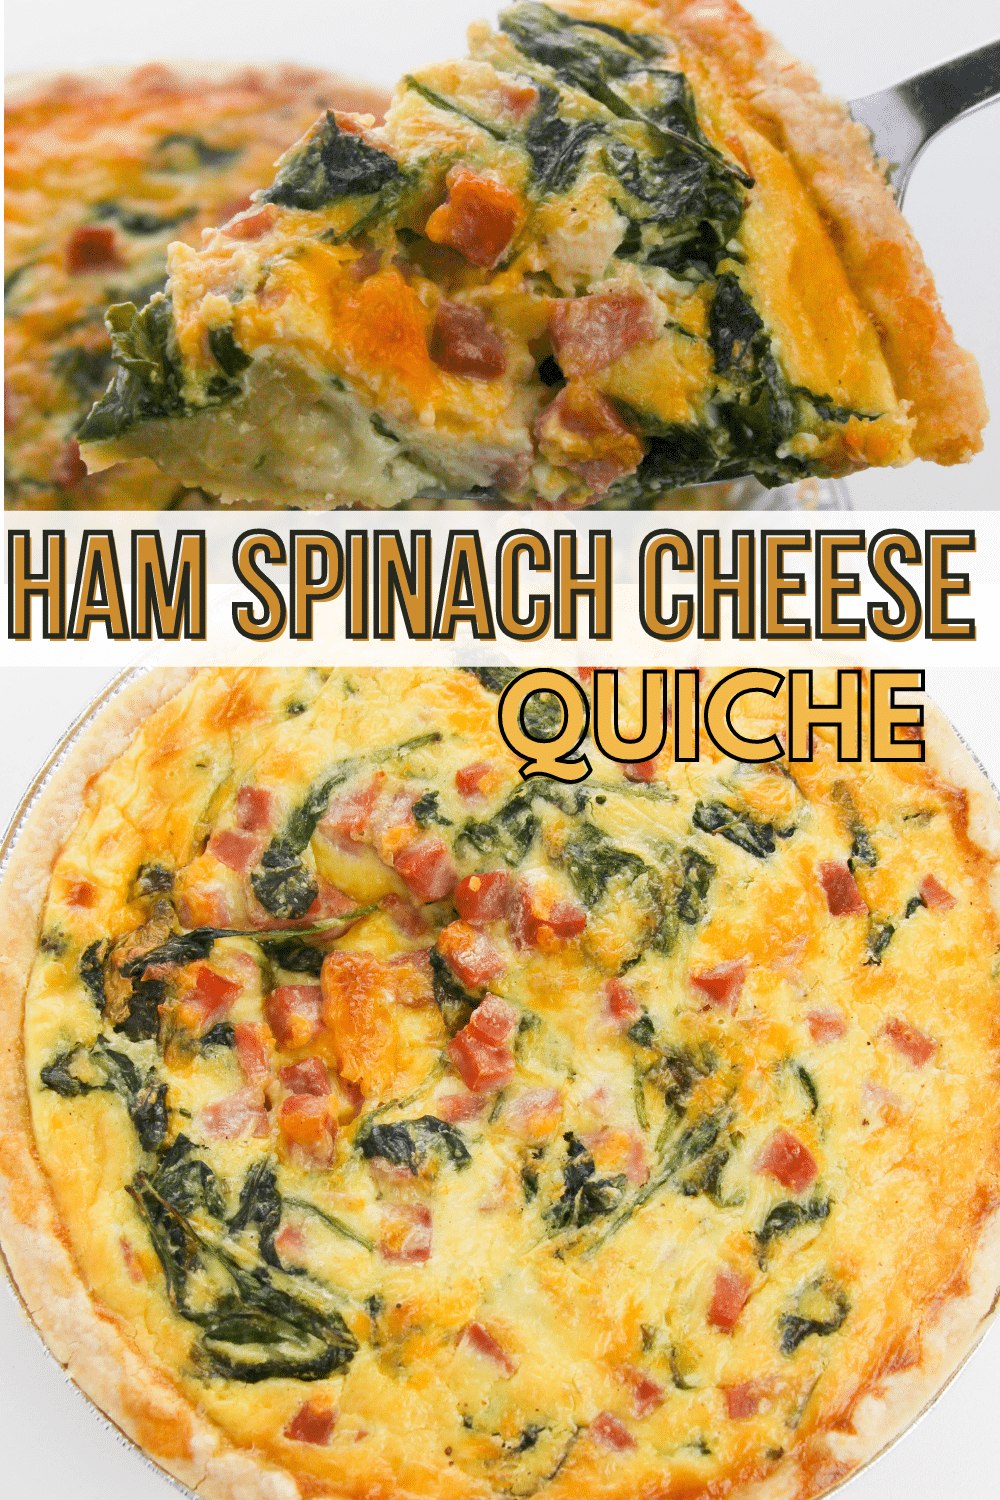 This ham spinach cheese quiche will be one of your favorite recipes. It’s versatile, easy to make, and can be eaten for any meal of the day. #quiche #ham #spinach #cheese #recipe via @wondermomwannab